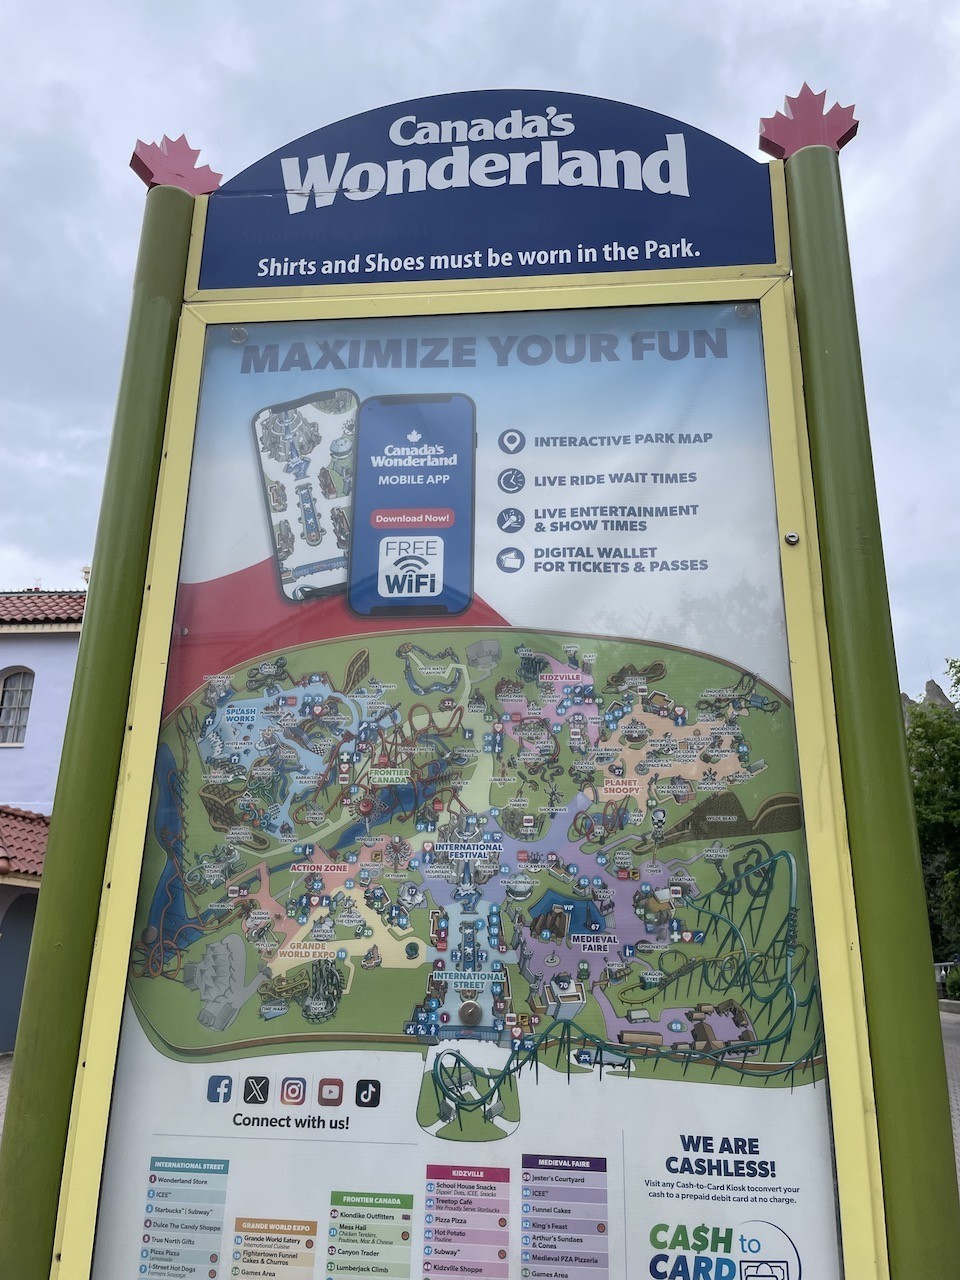 Canada's Wonderland Map Vaughn Ontario Canada - In addition to large maps throughout the park, Canada's Wonderland also offers an app to download and use at the park. There is a detailed map in the app that provides ride line time updates to help you as you plan your schedule for the day